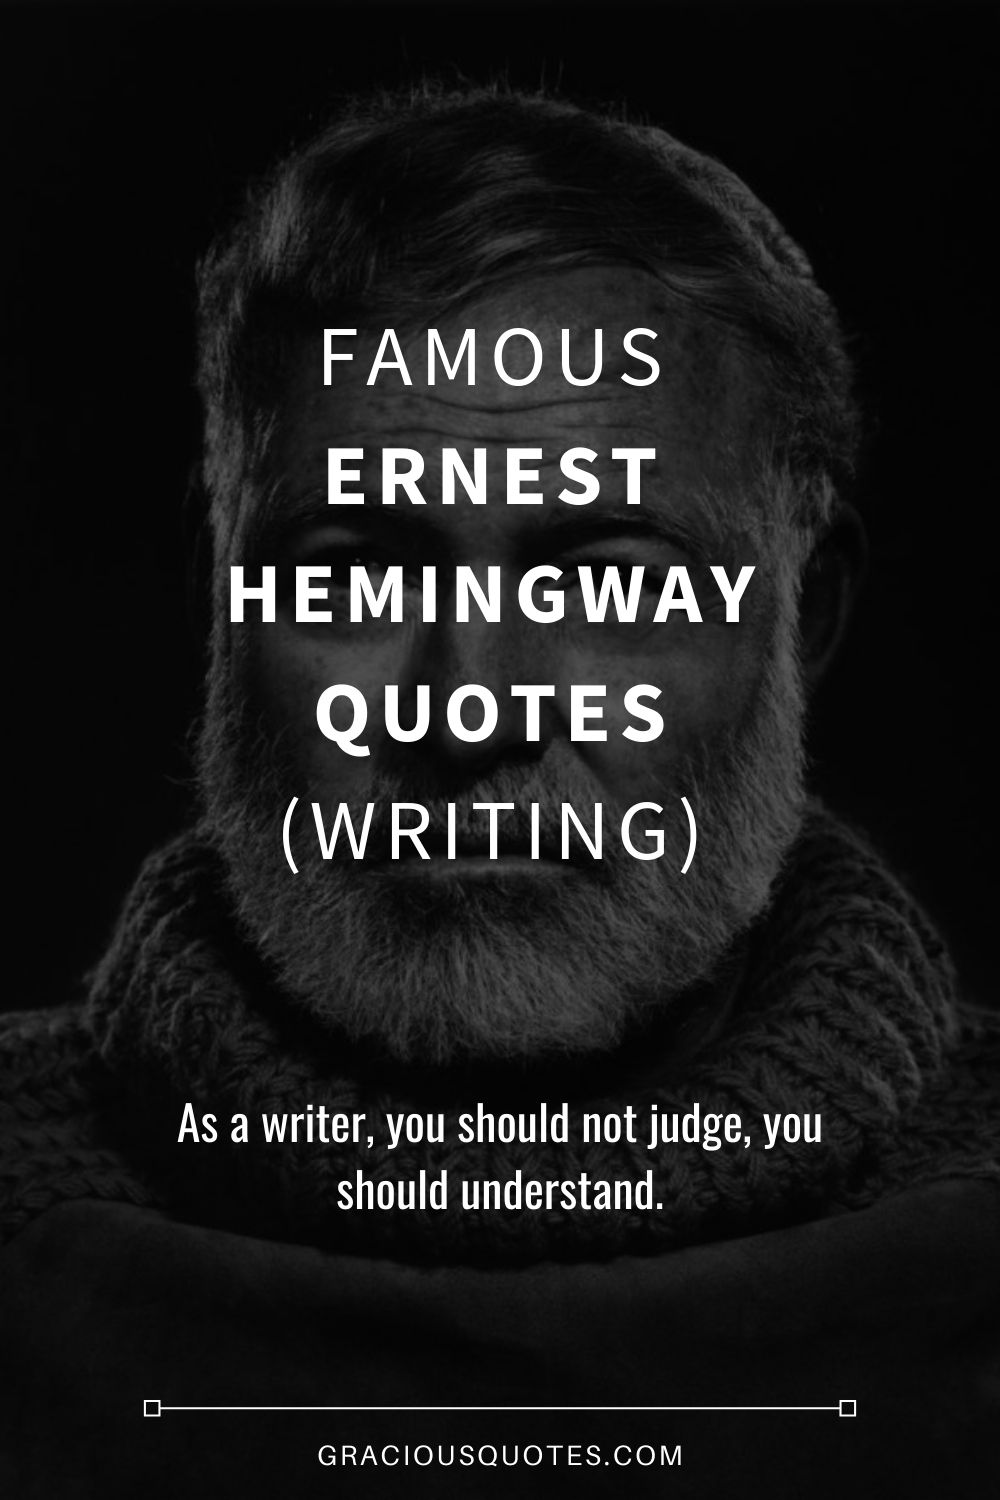 Famous Ernest Hemingway Quotes (WRITING) - Gracious Quotes